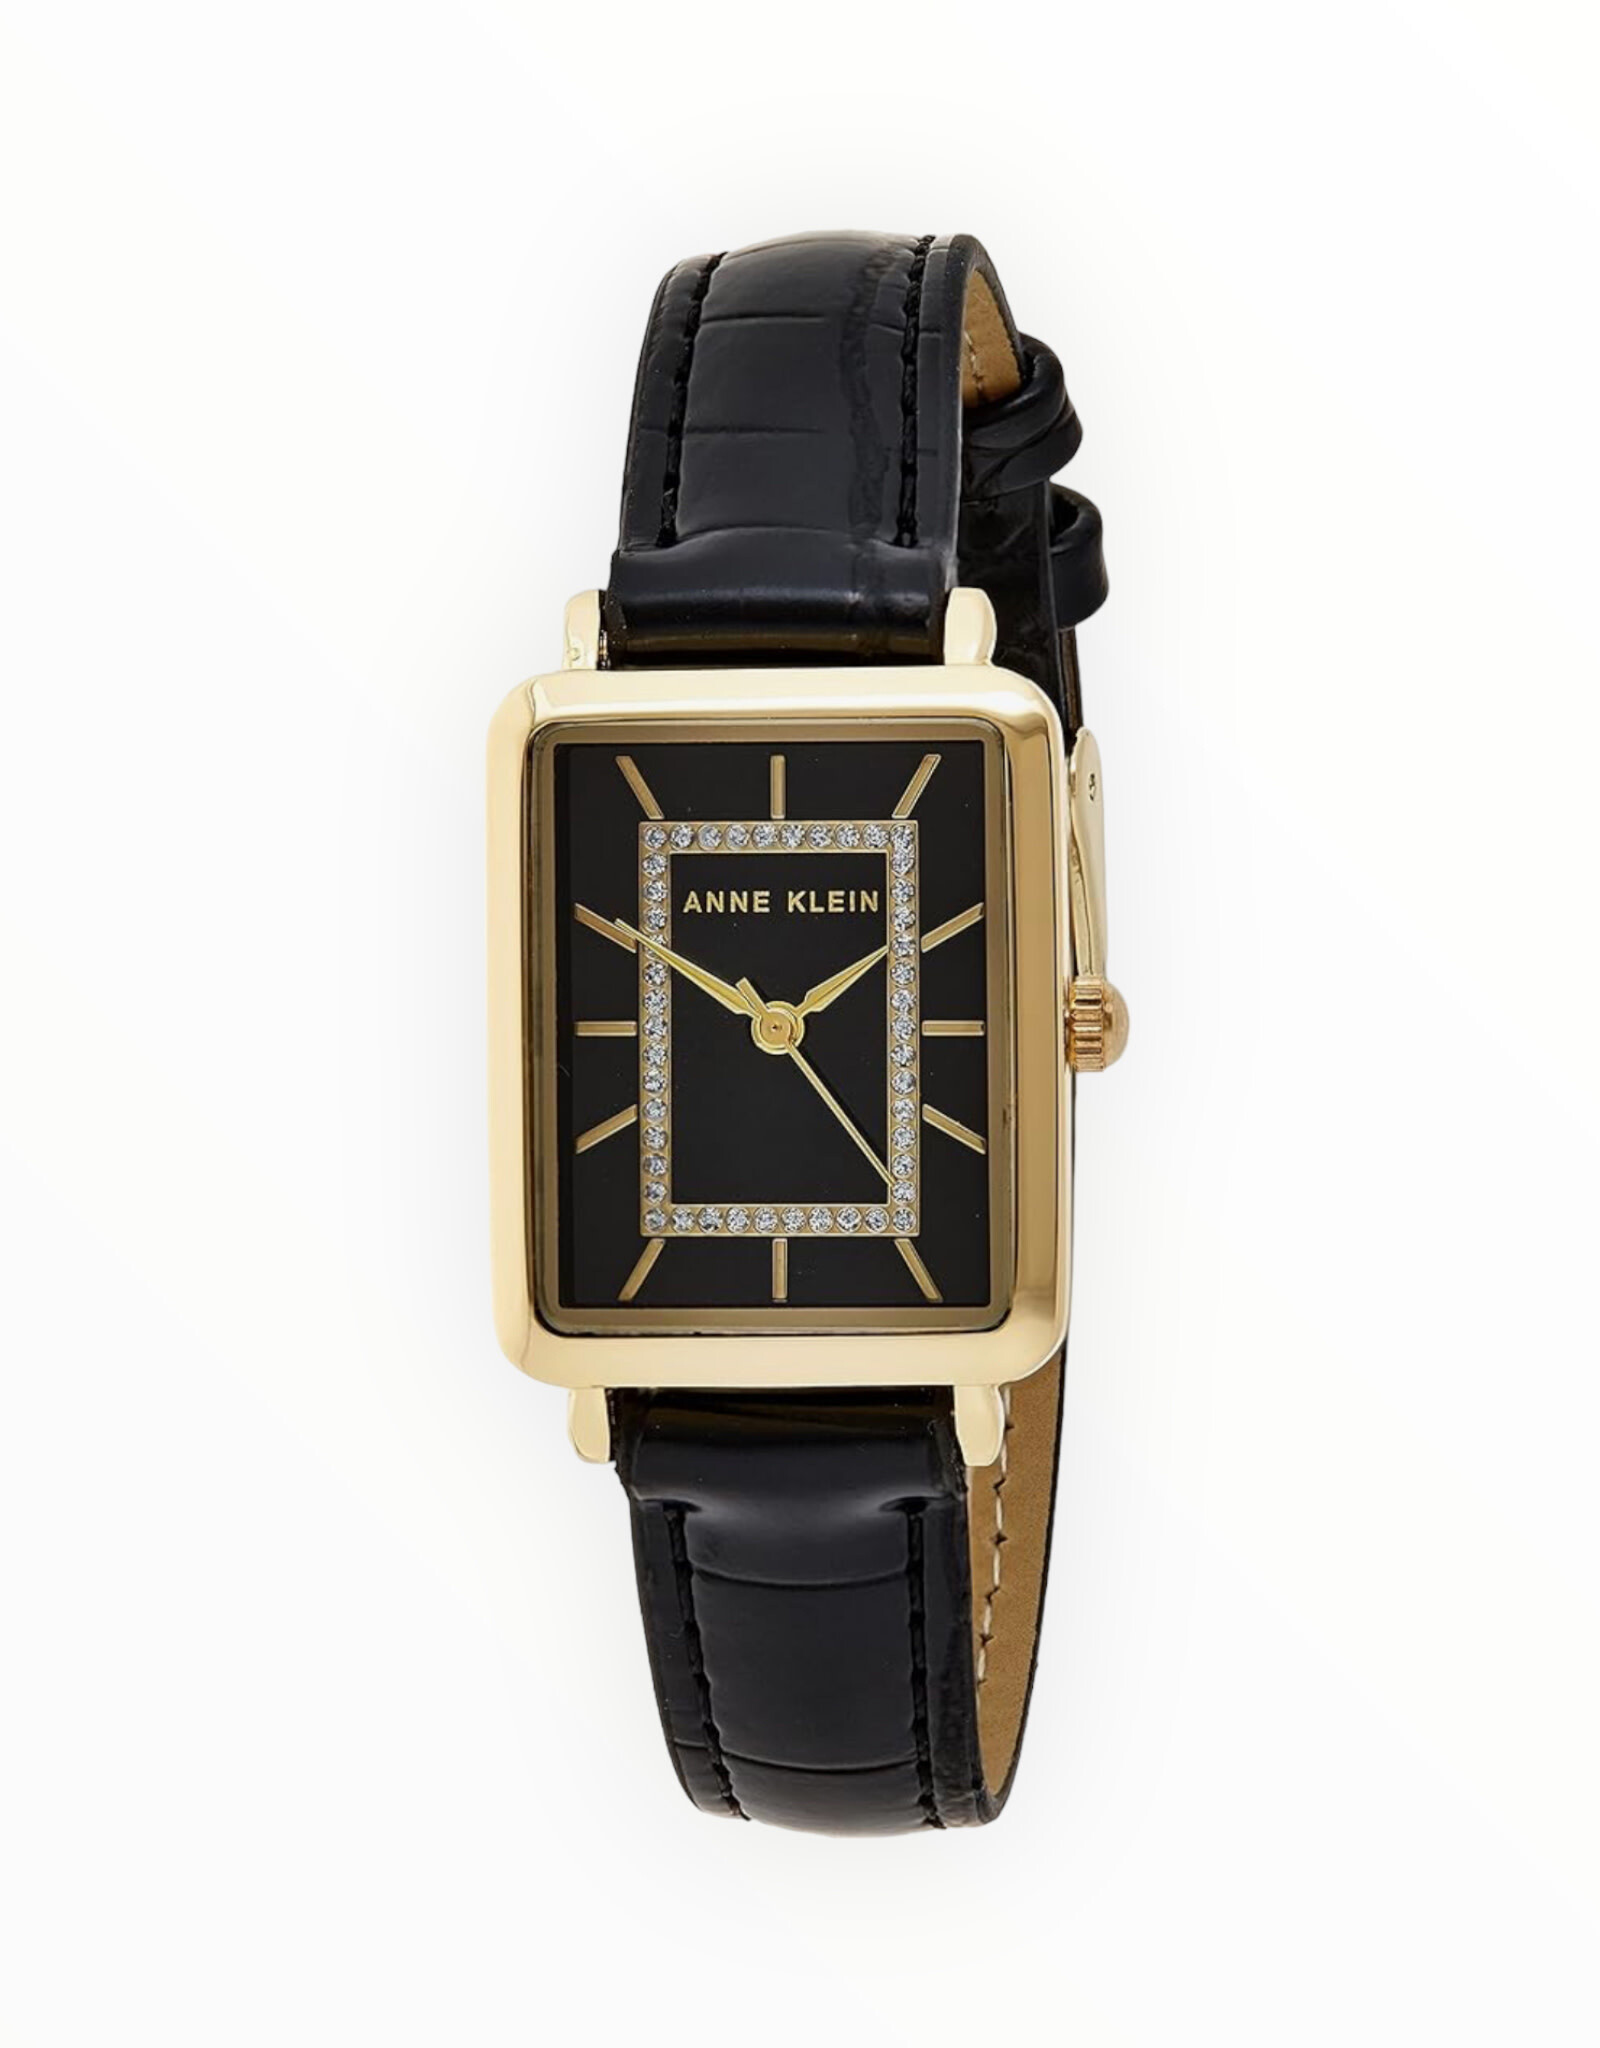 Anne Klein Anne Klein Watch Glitter Accented Glossy Black Dial with Yellow Gold-Tone Case Hand & Markers Black Croco Grain Faux Leather Strap with Buckle Closure